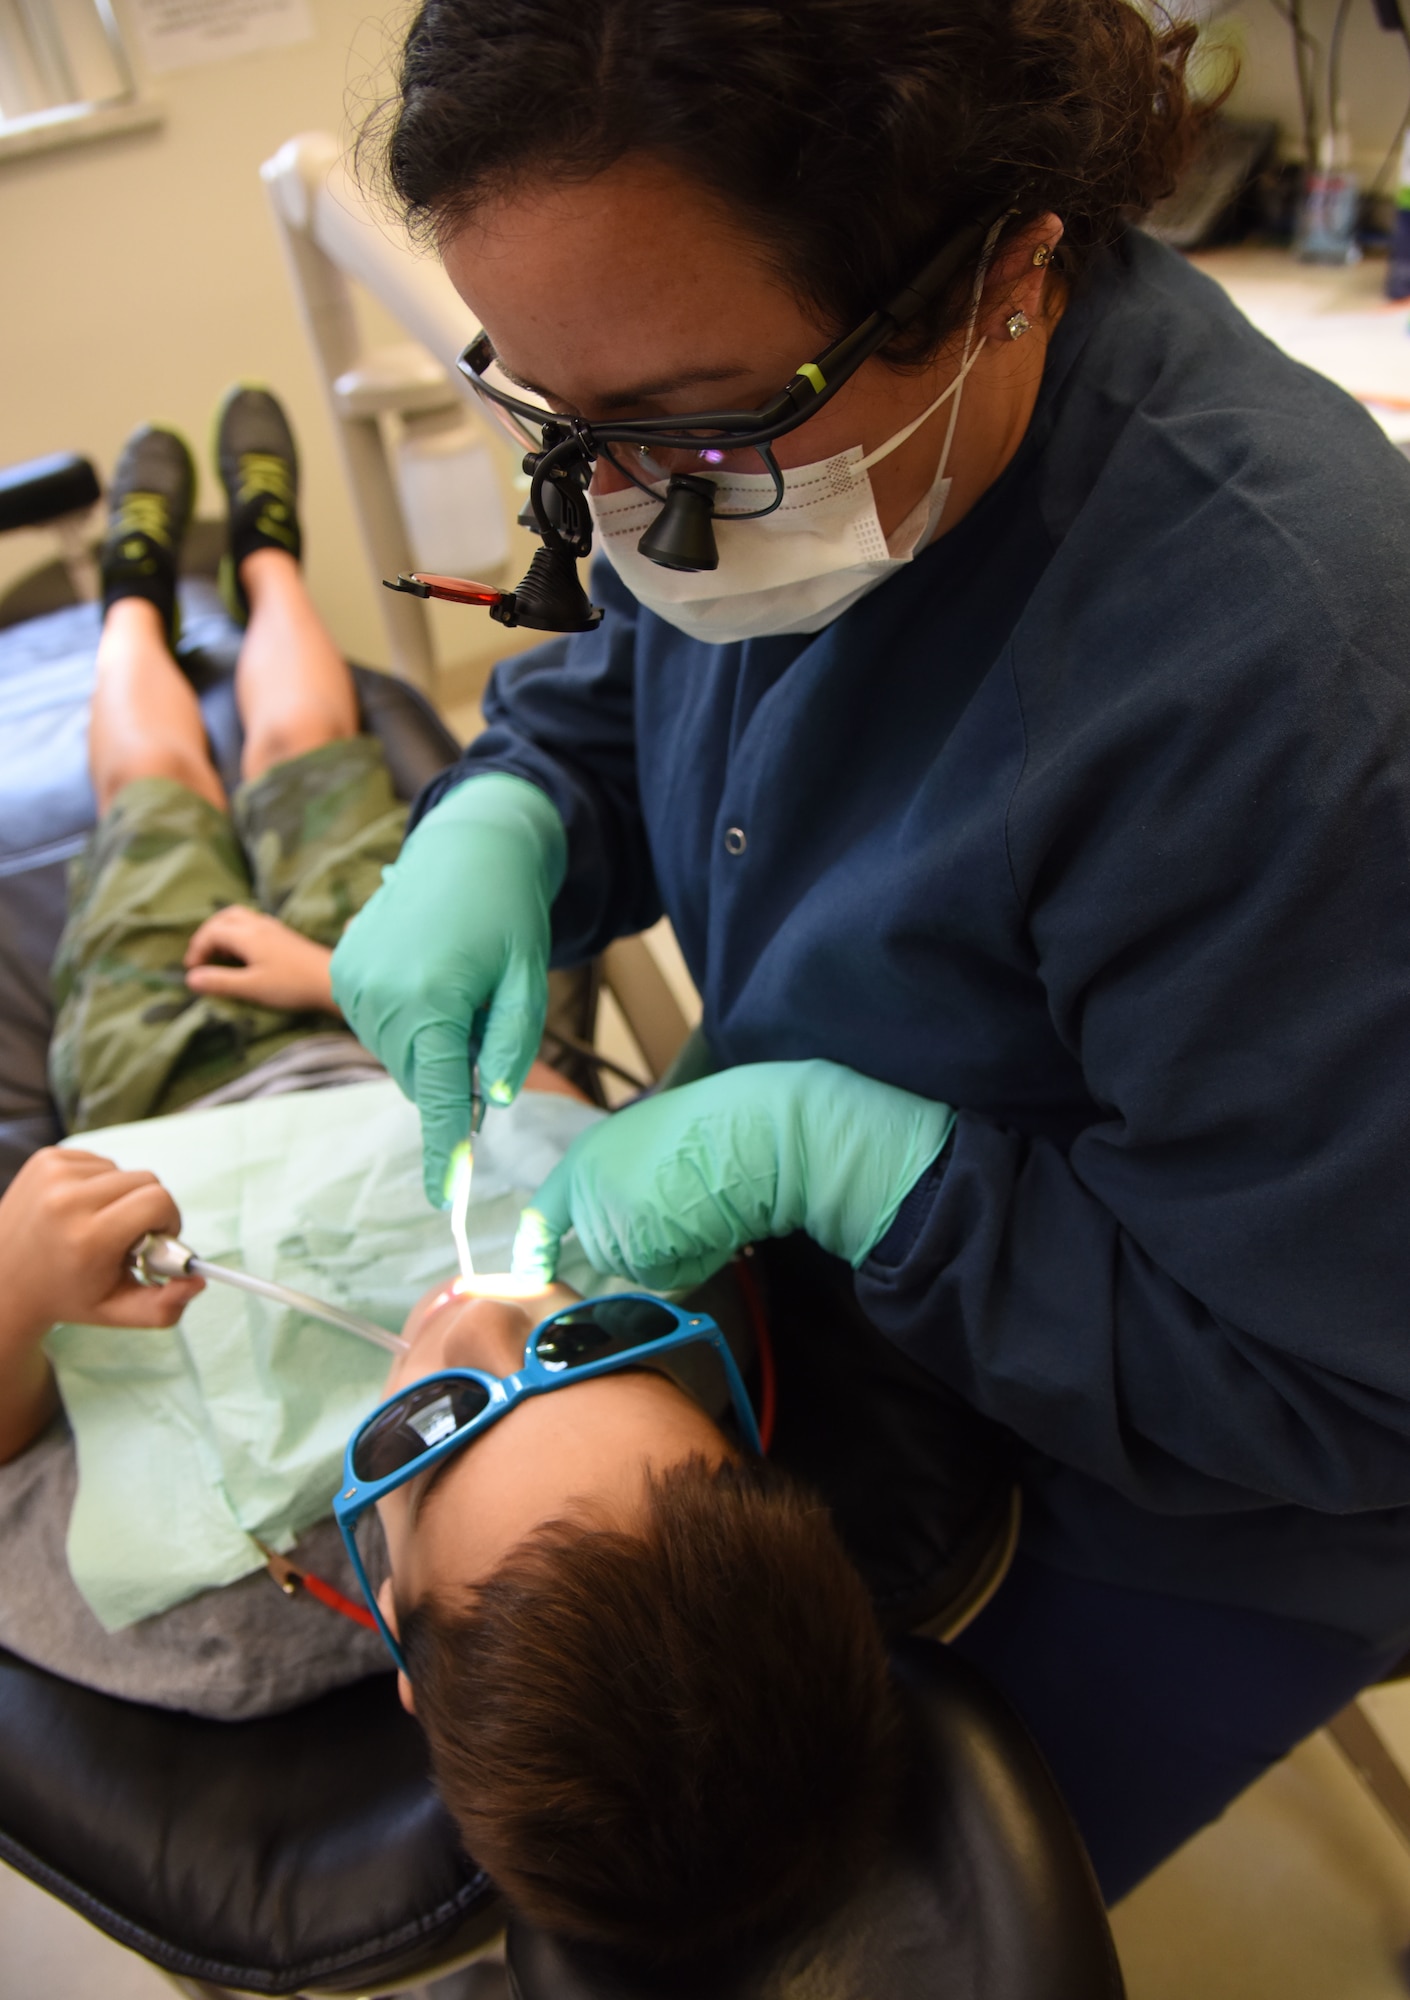 Kendra Cuevas, 81st Dental Squadron dental hygienist, provides a dental cleaning on Logan Lester, son of U.S. Navy Steelworker 2nd Class Ian Lester, a Seabee with Naval Mobile Construction Battalion 133, Naval Construction Battalion Center, Gulfport, Mississippi, during the 8th Annual Give Kids a Smile Day at the dental clinic Feb. 14, 2018, on Keesler Air Force Base, Mississippi. The event was held in recognition of National Children’s Dental Health Month and included free dental exams, radiographs and cleanings for children age two and older. (U.S. Air Force photo by Kemberly Groue)